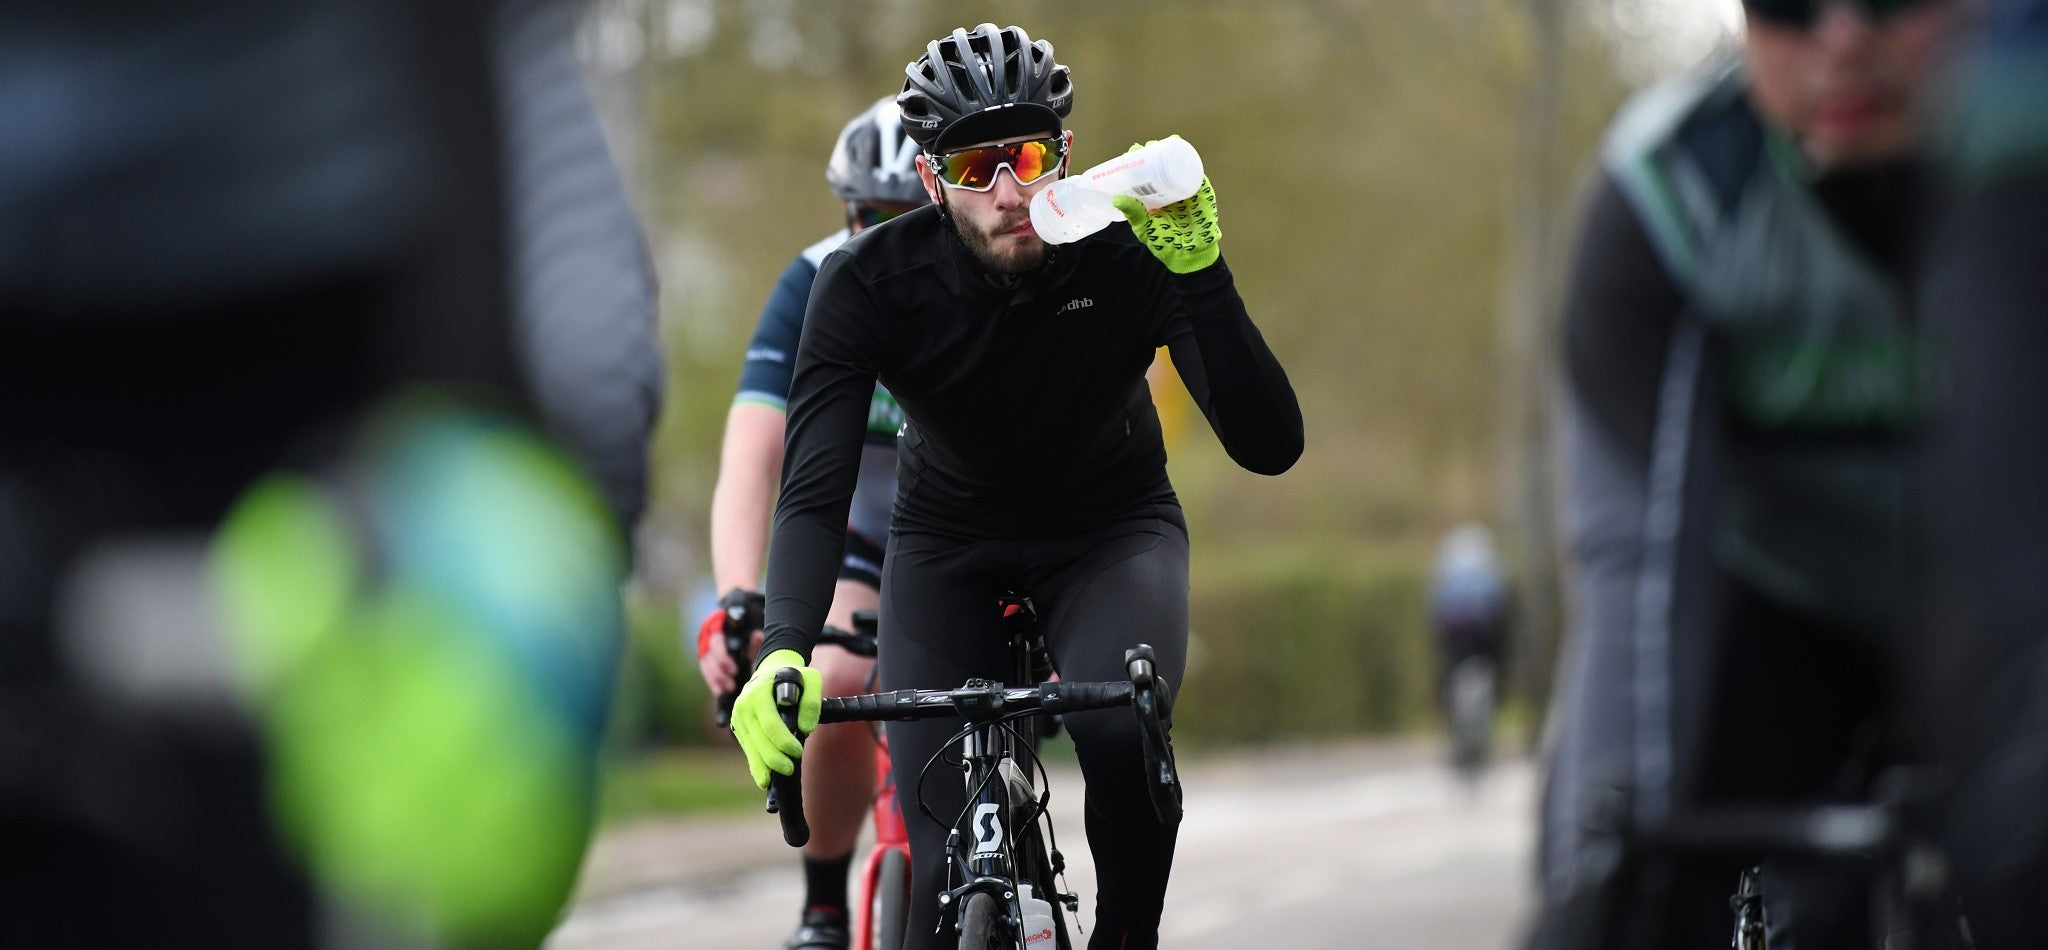 Cyclist takes a drink